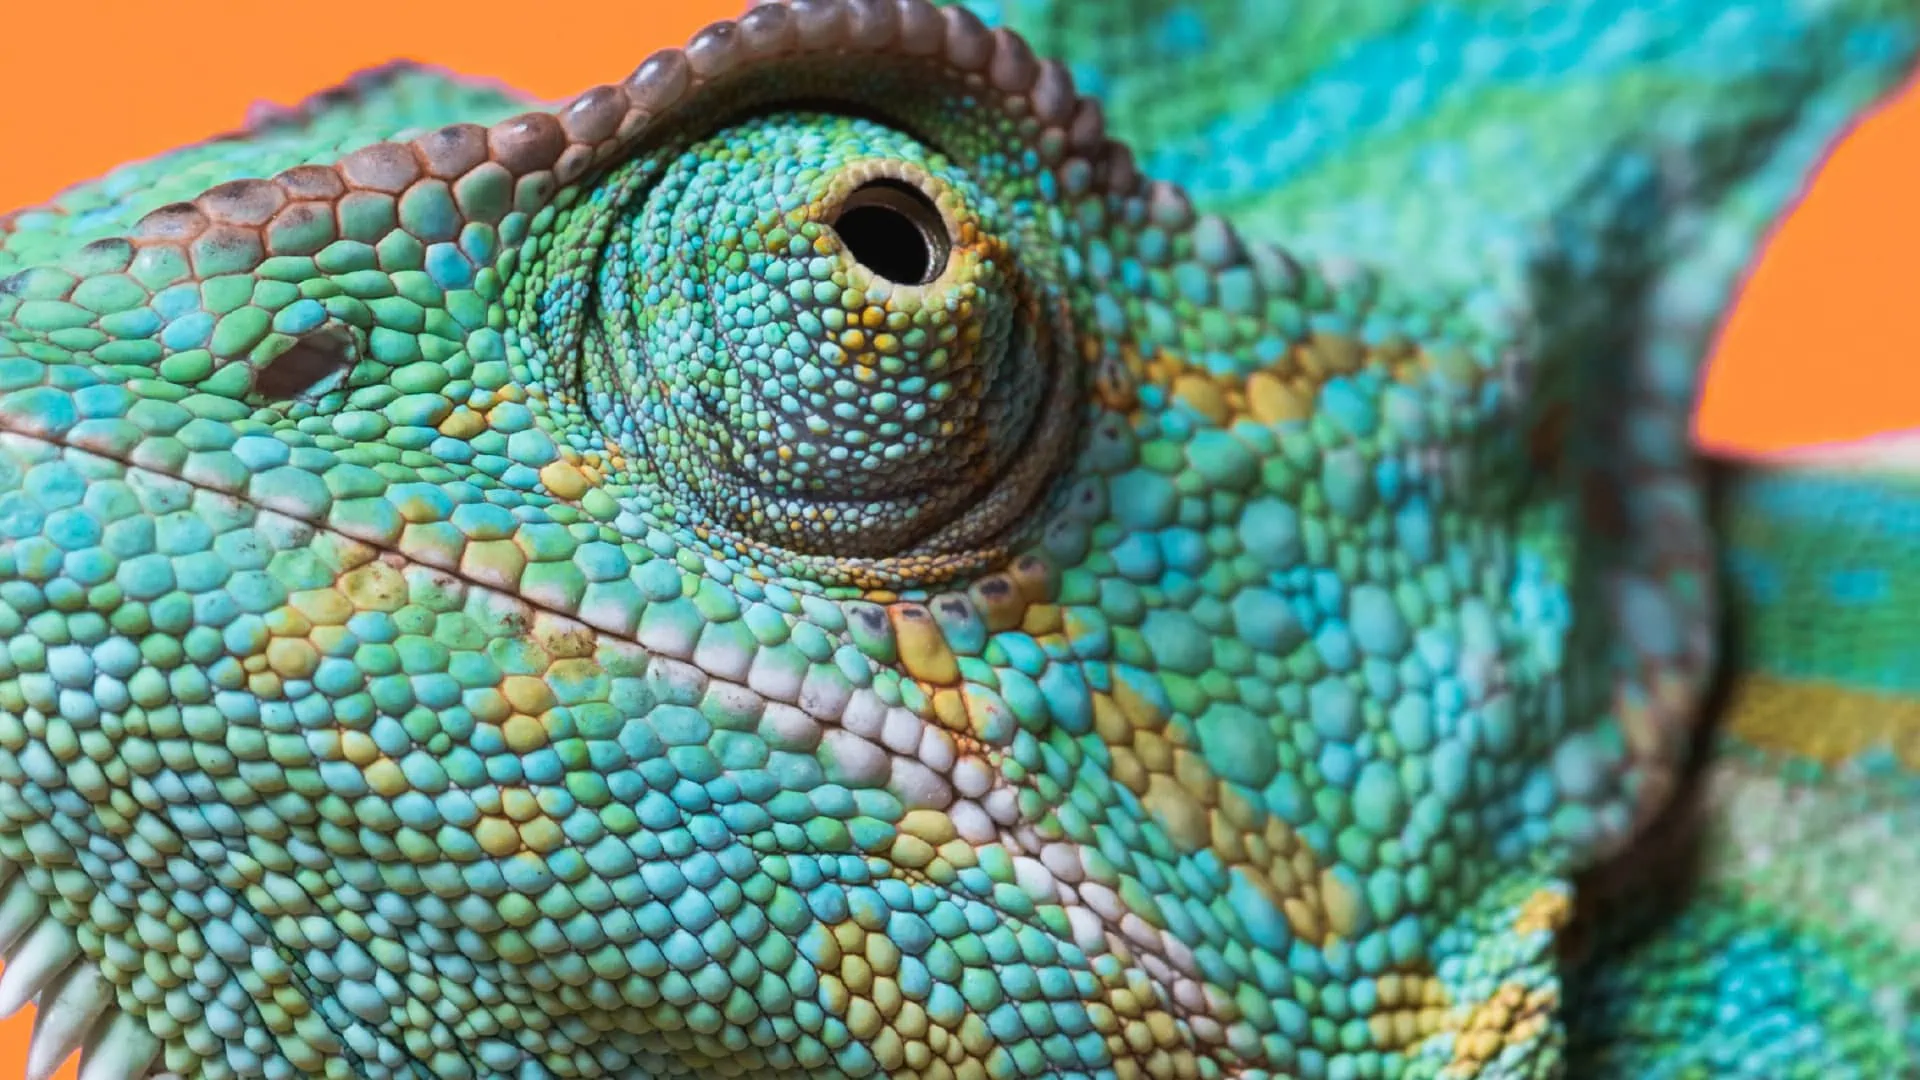 A hero image of a close-up photograph of a blue and green iguana eye for the NEO Insight article